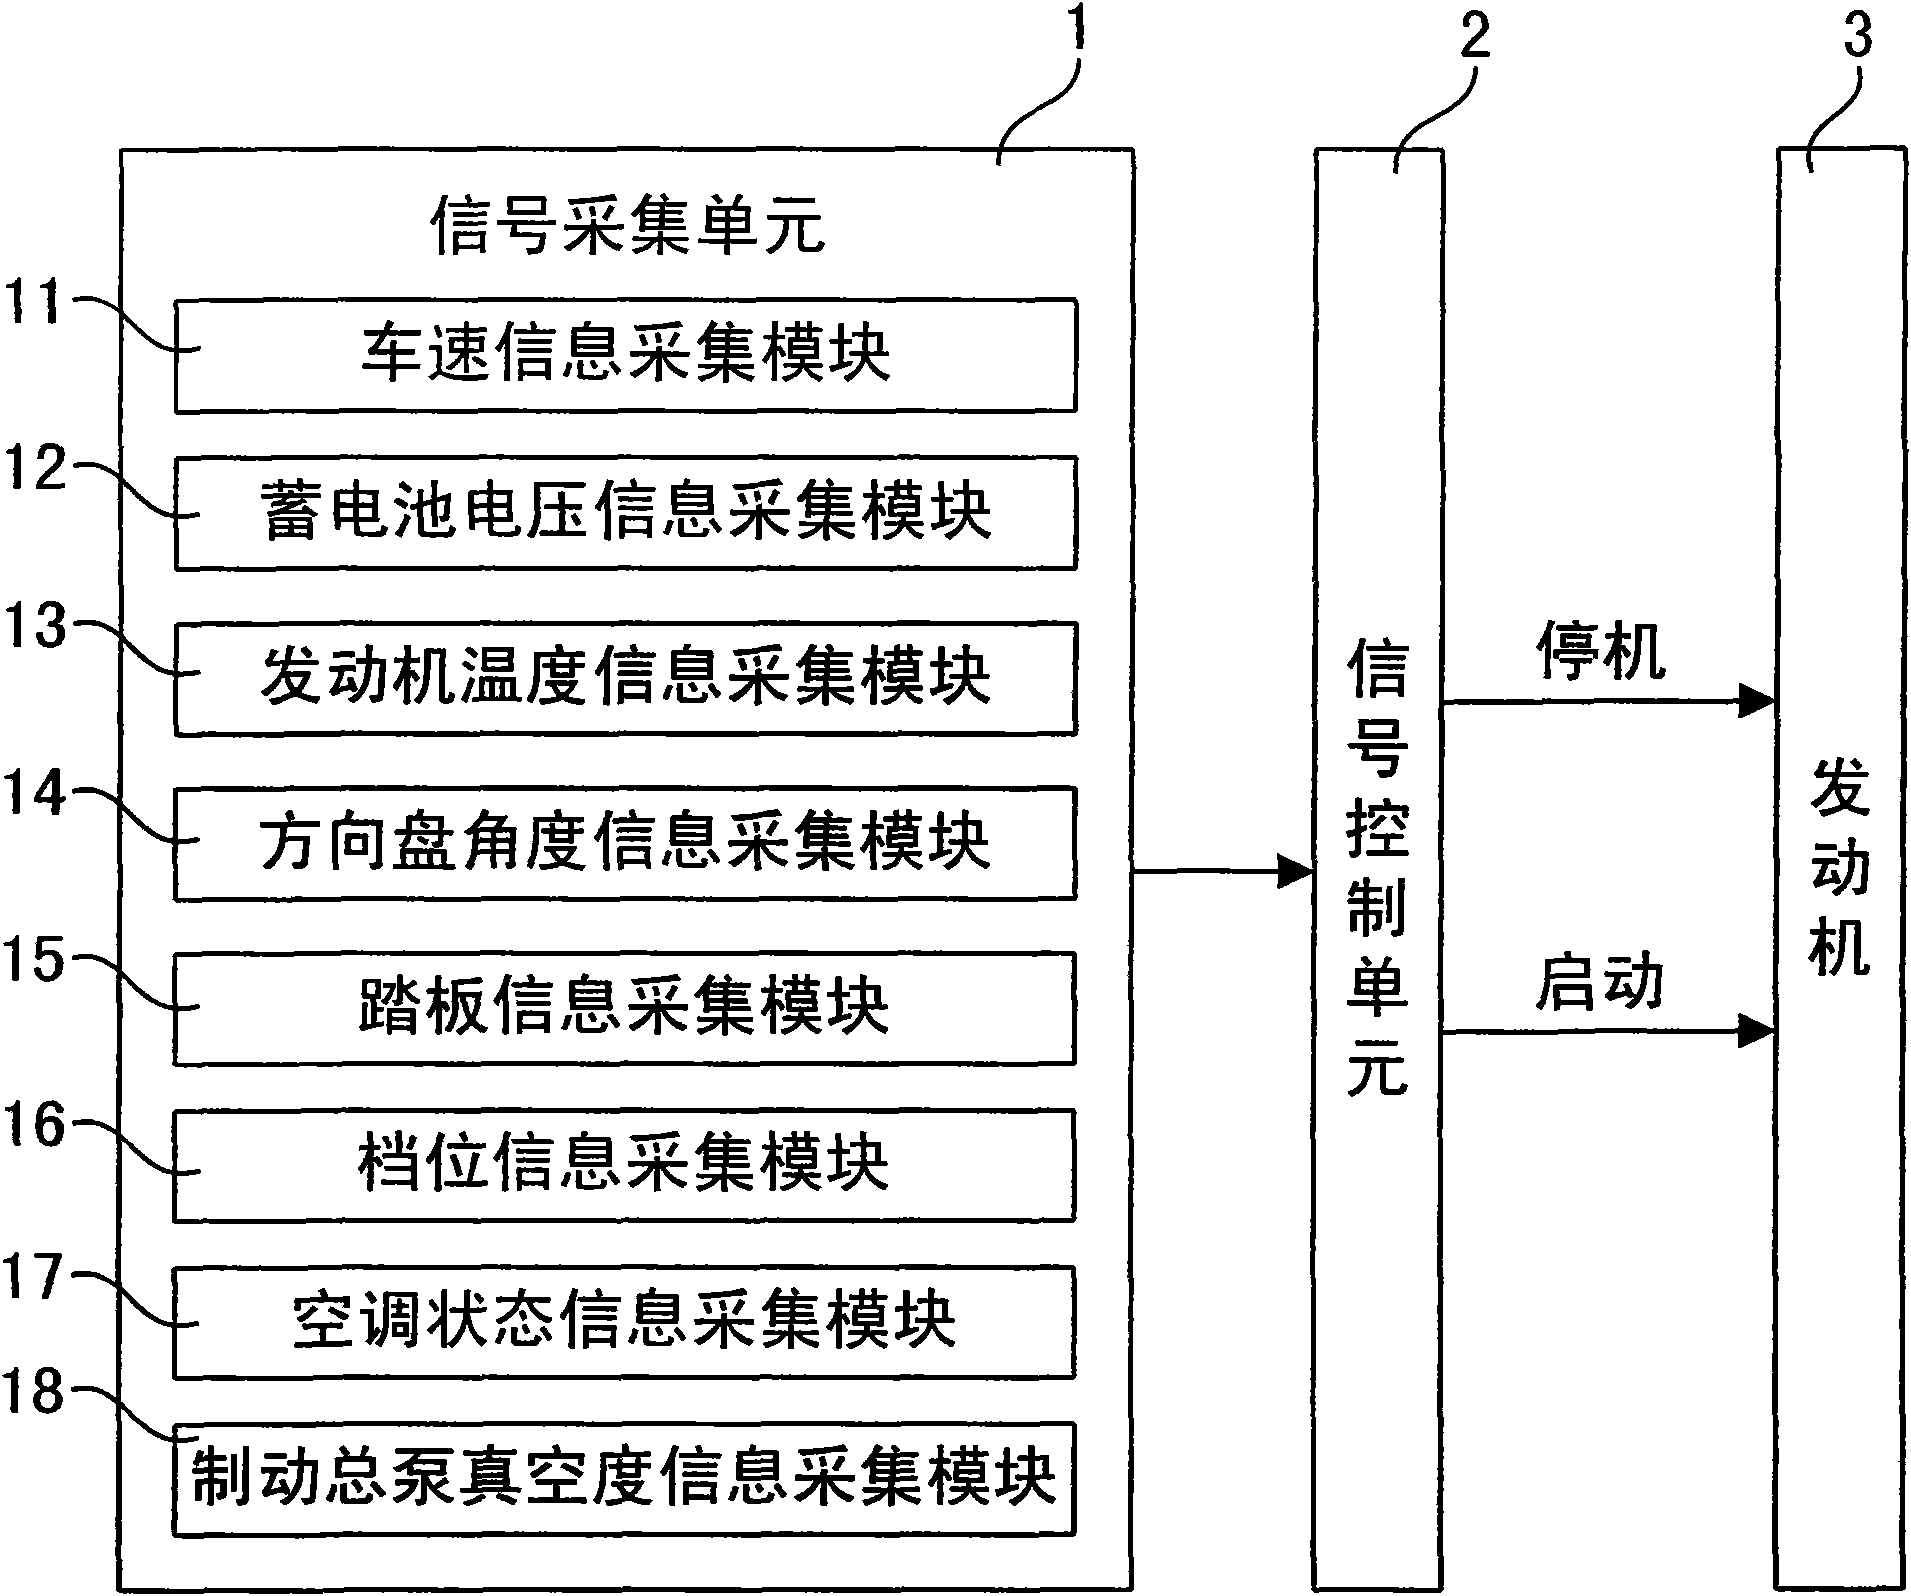 Vehicle engine high-speed starting and stopping control method and system based on active shutdown mode